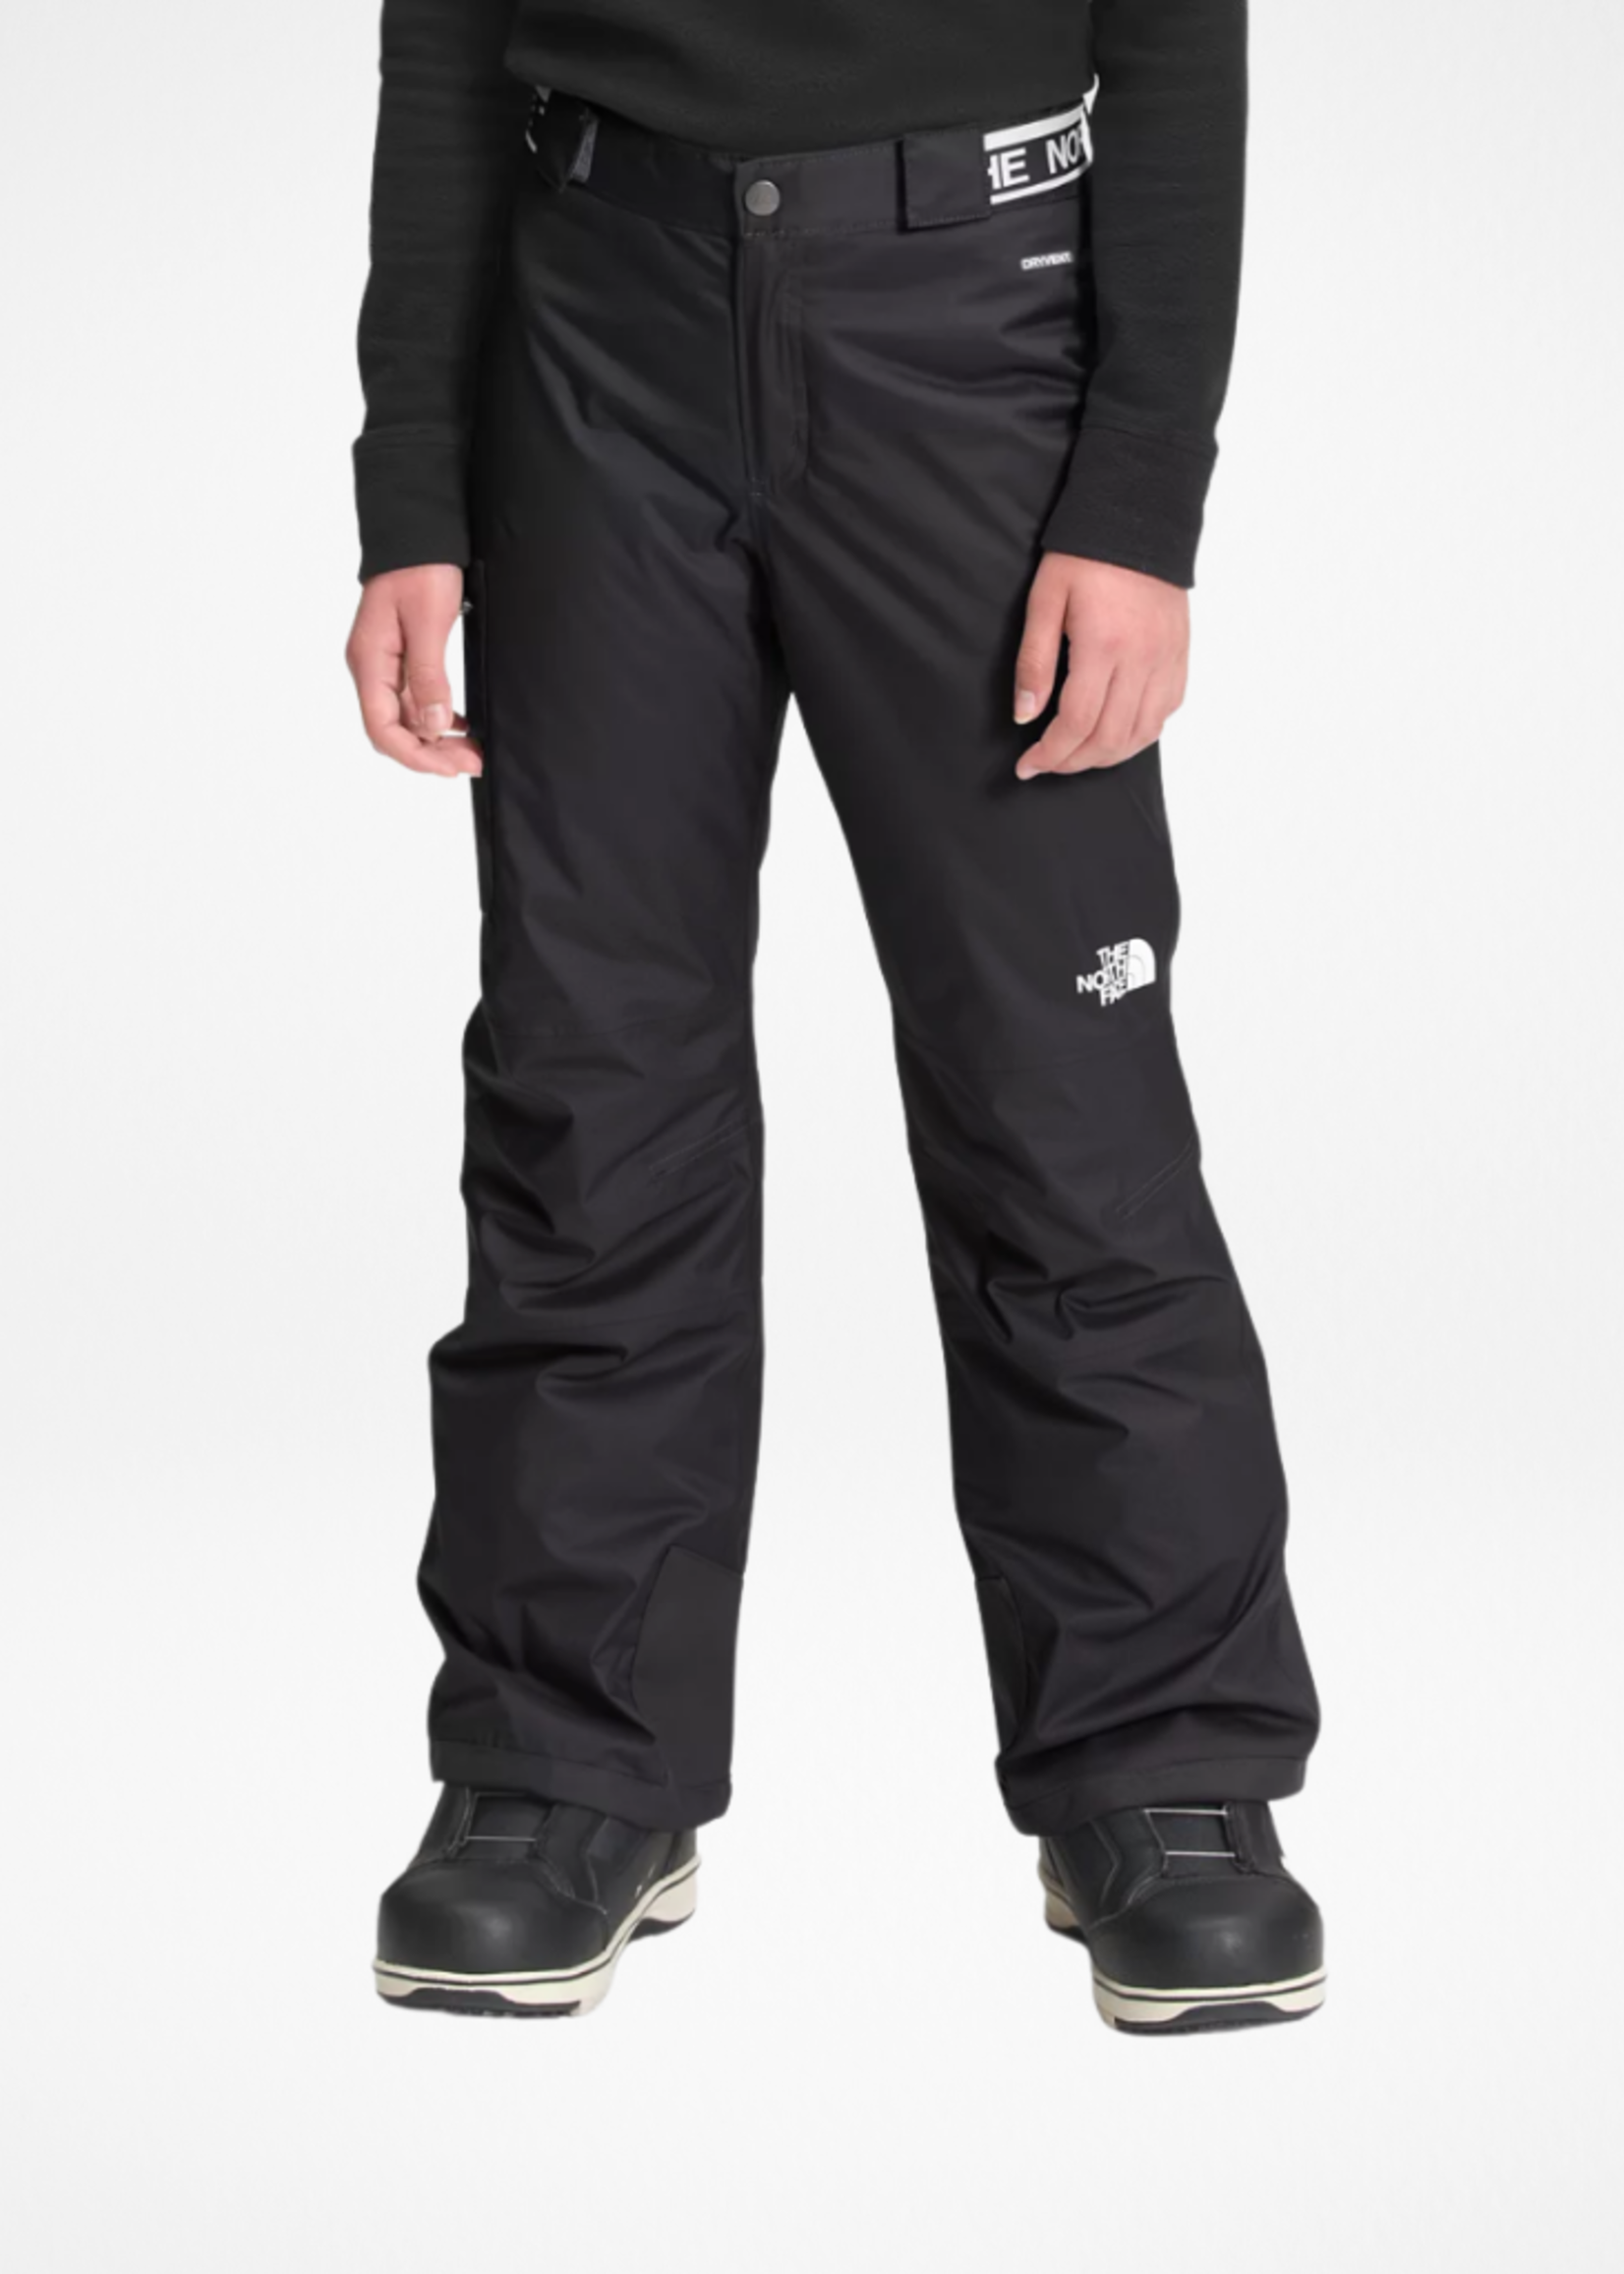 THE NORTH FACE 22 TNF G FREEDOM INS PANTS